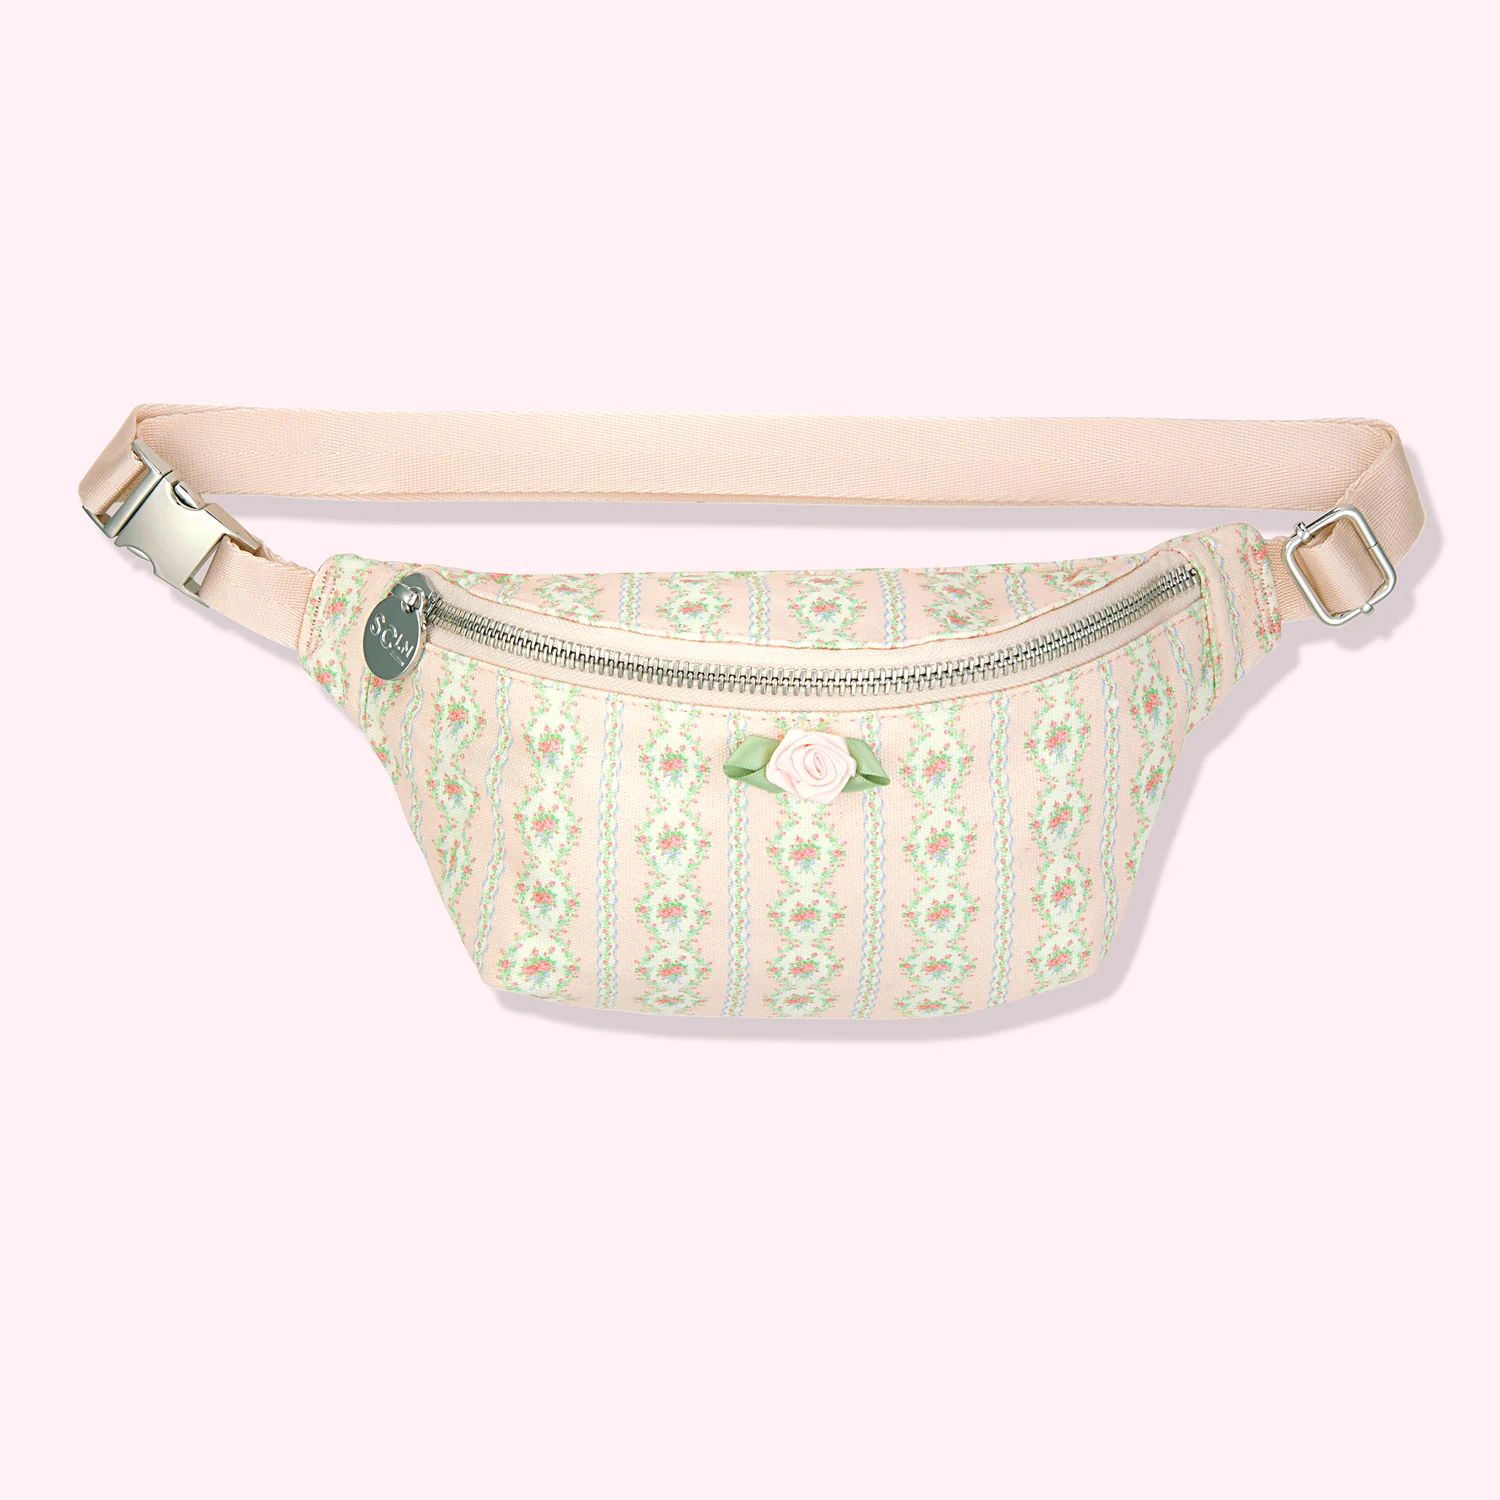 Floral Printed Canvas Fanny Pack - Customizable | Stoney Clover Lane | Stoney Clover Lane